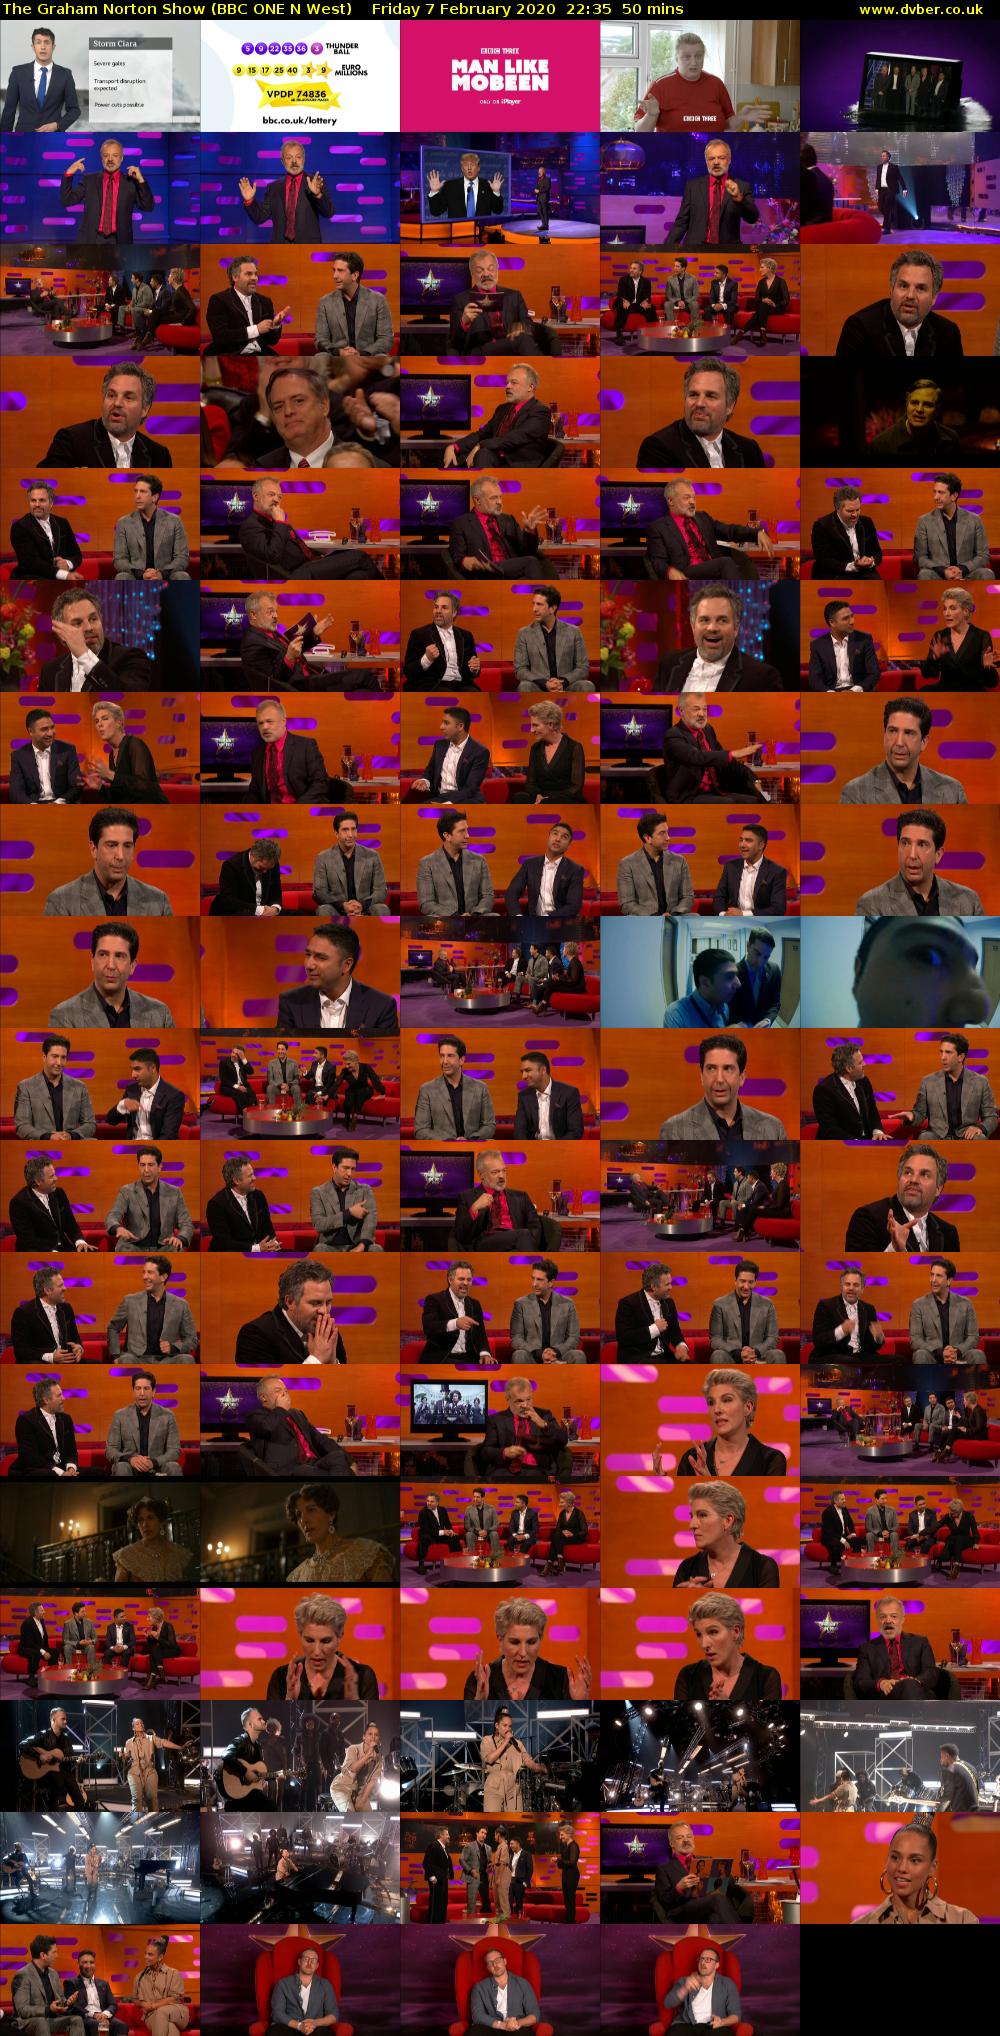 The Graham Norton Show (BBC ONE N West) Friday 7 February 2020 22:35 - 23:25